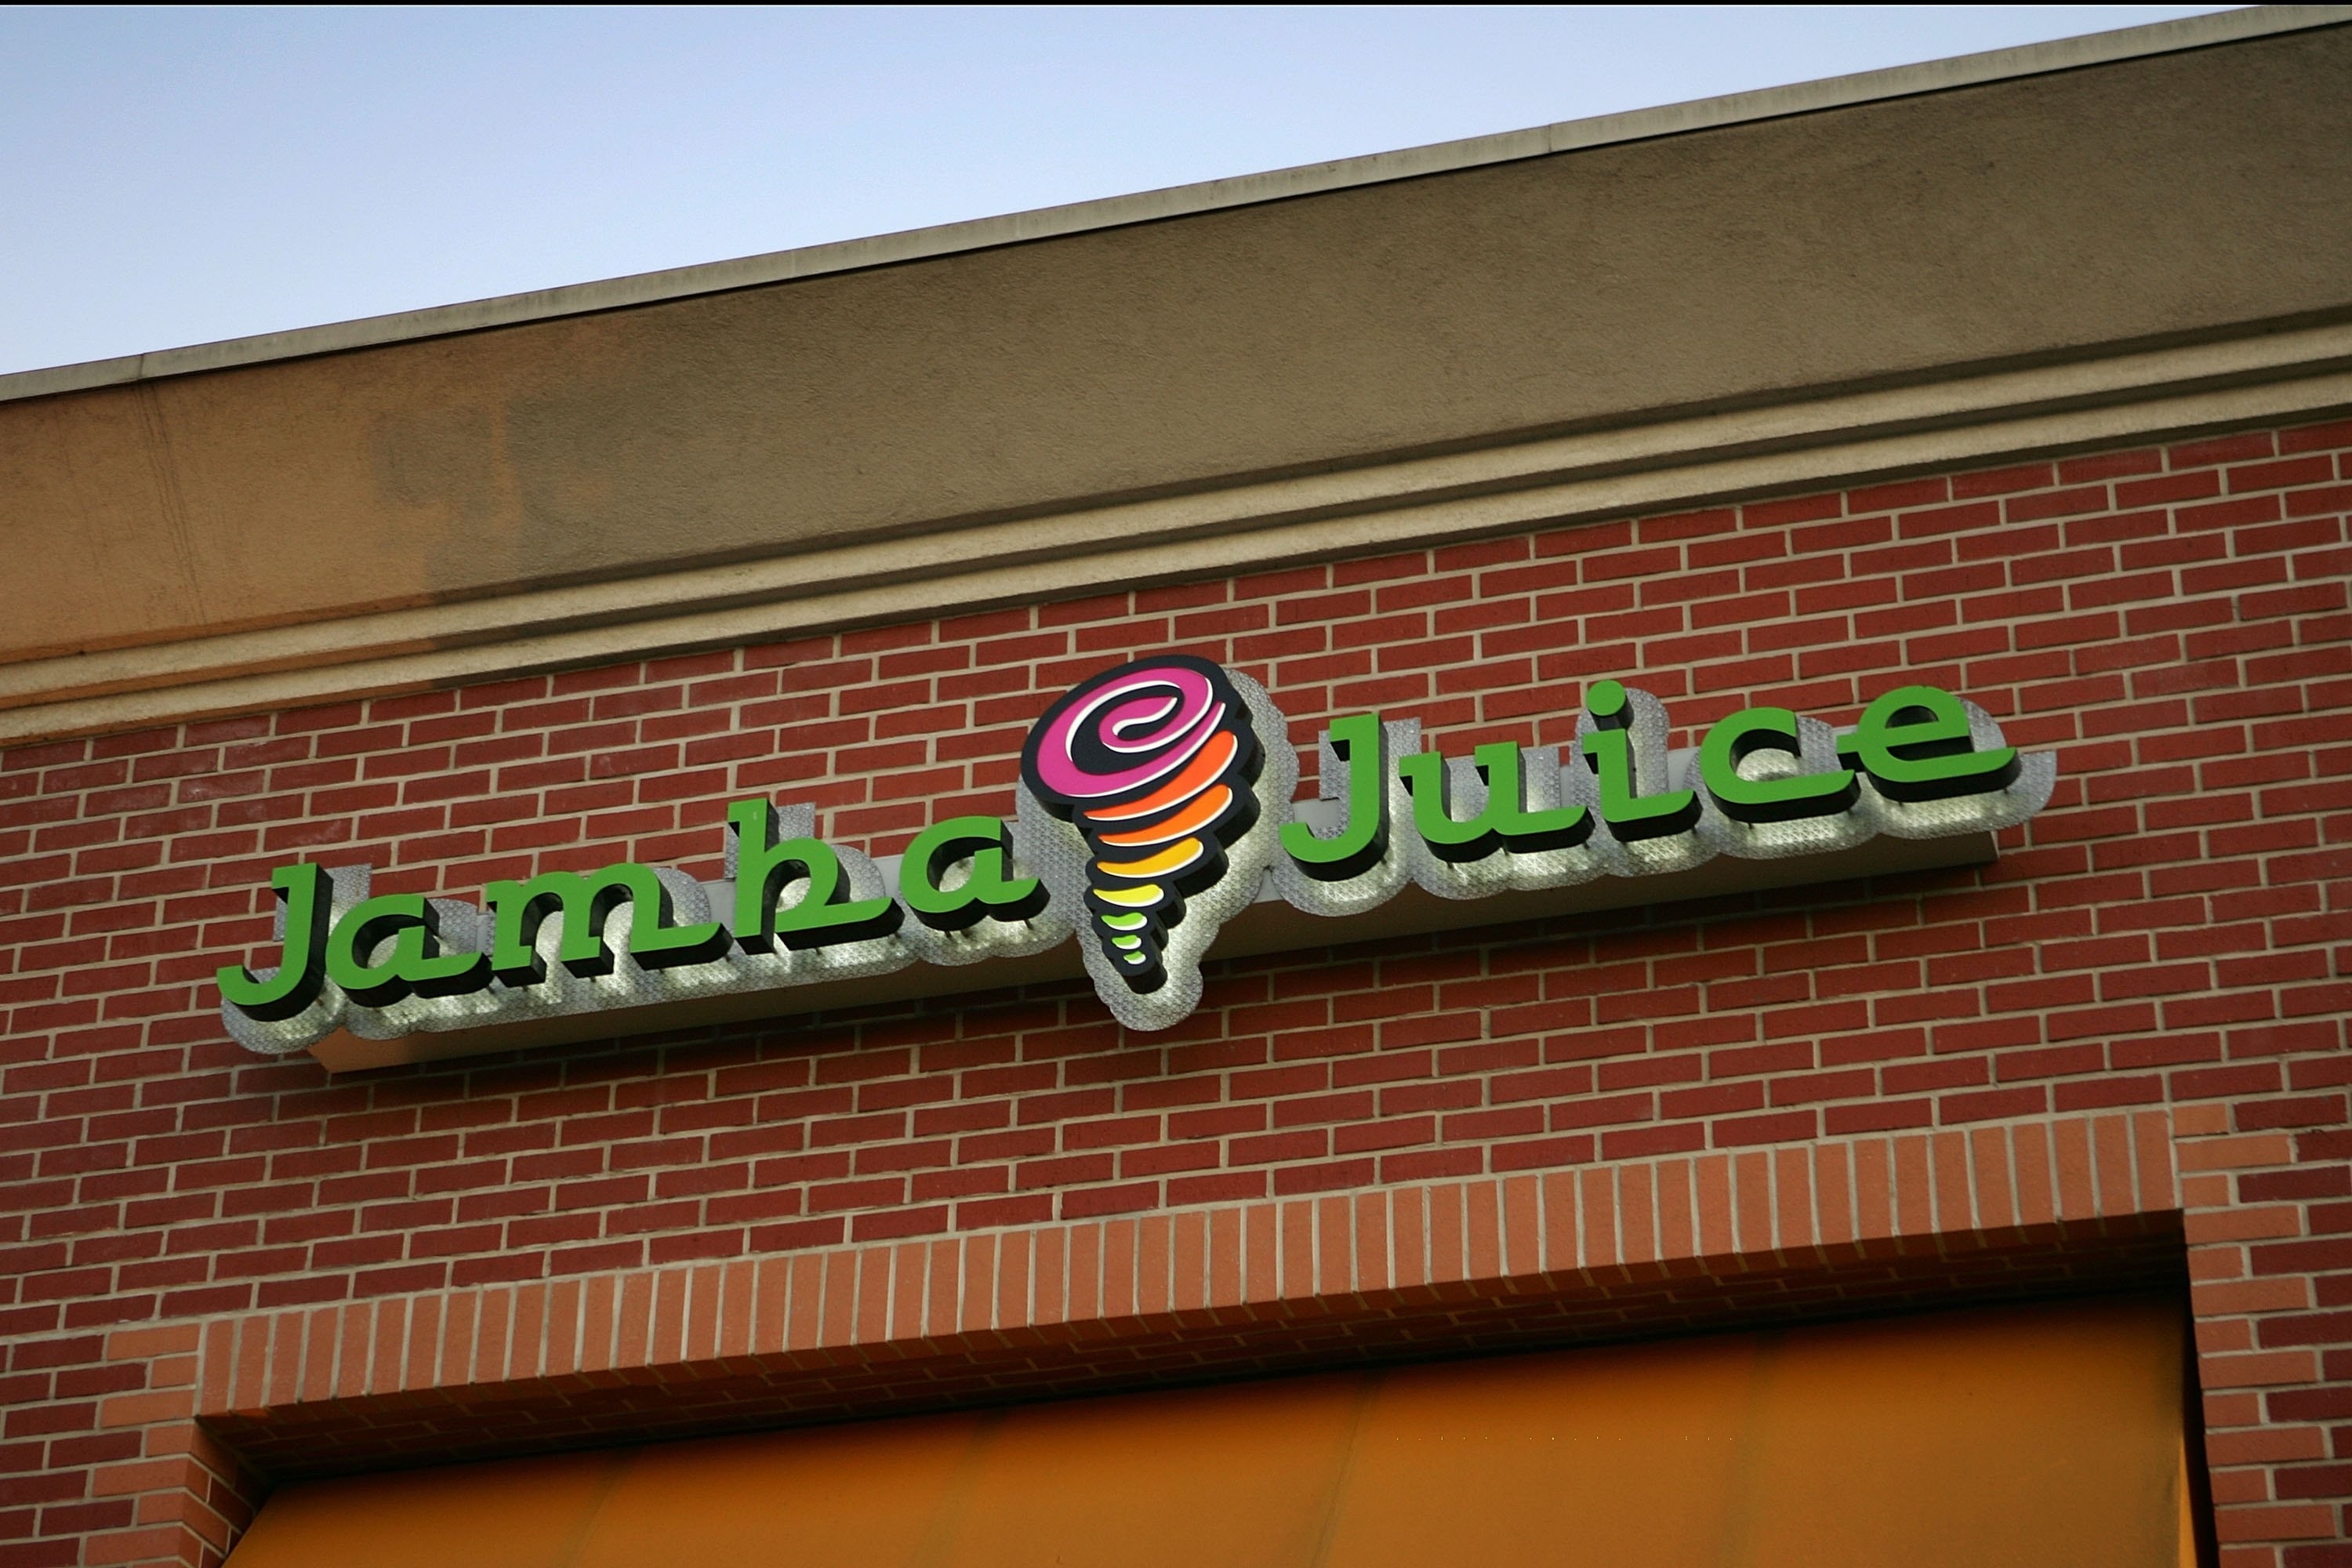 the Jambo Juice sign on a brick wall